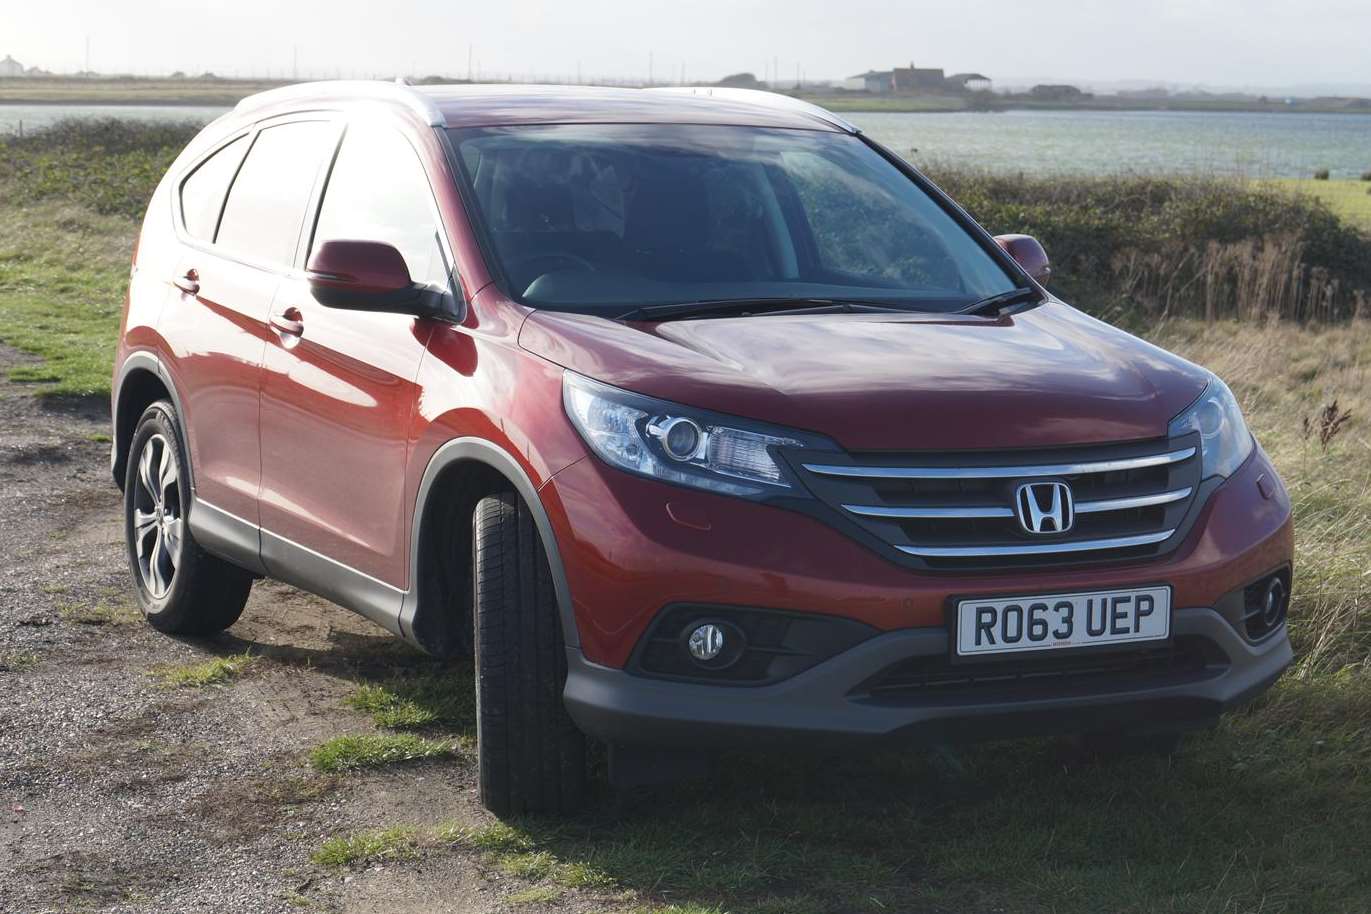 The CR-V looks at its best from the front